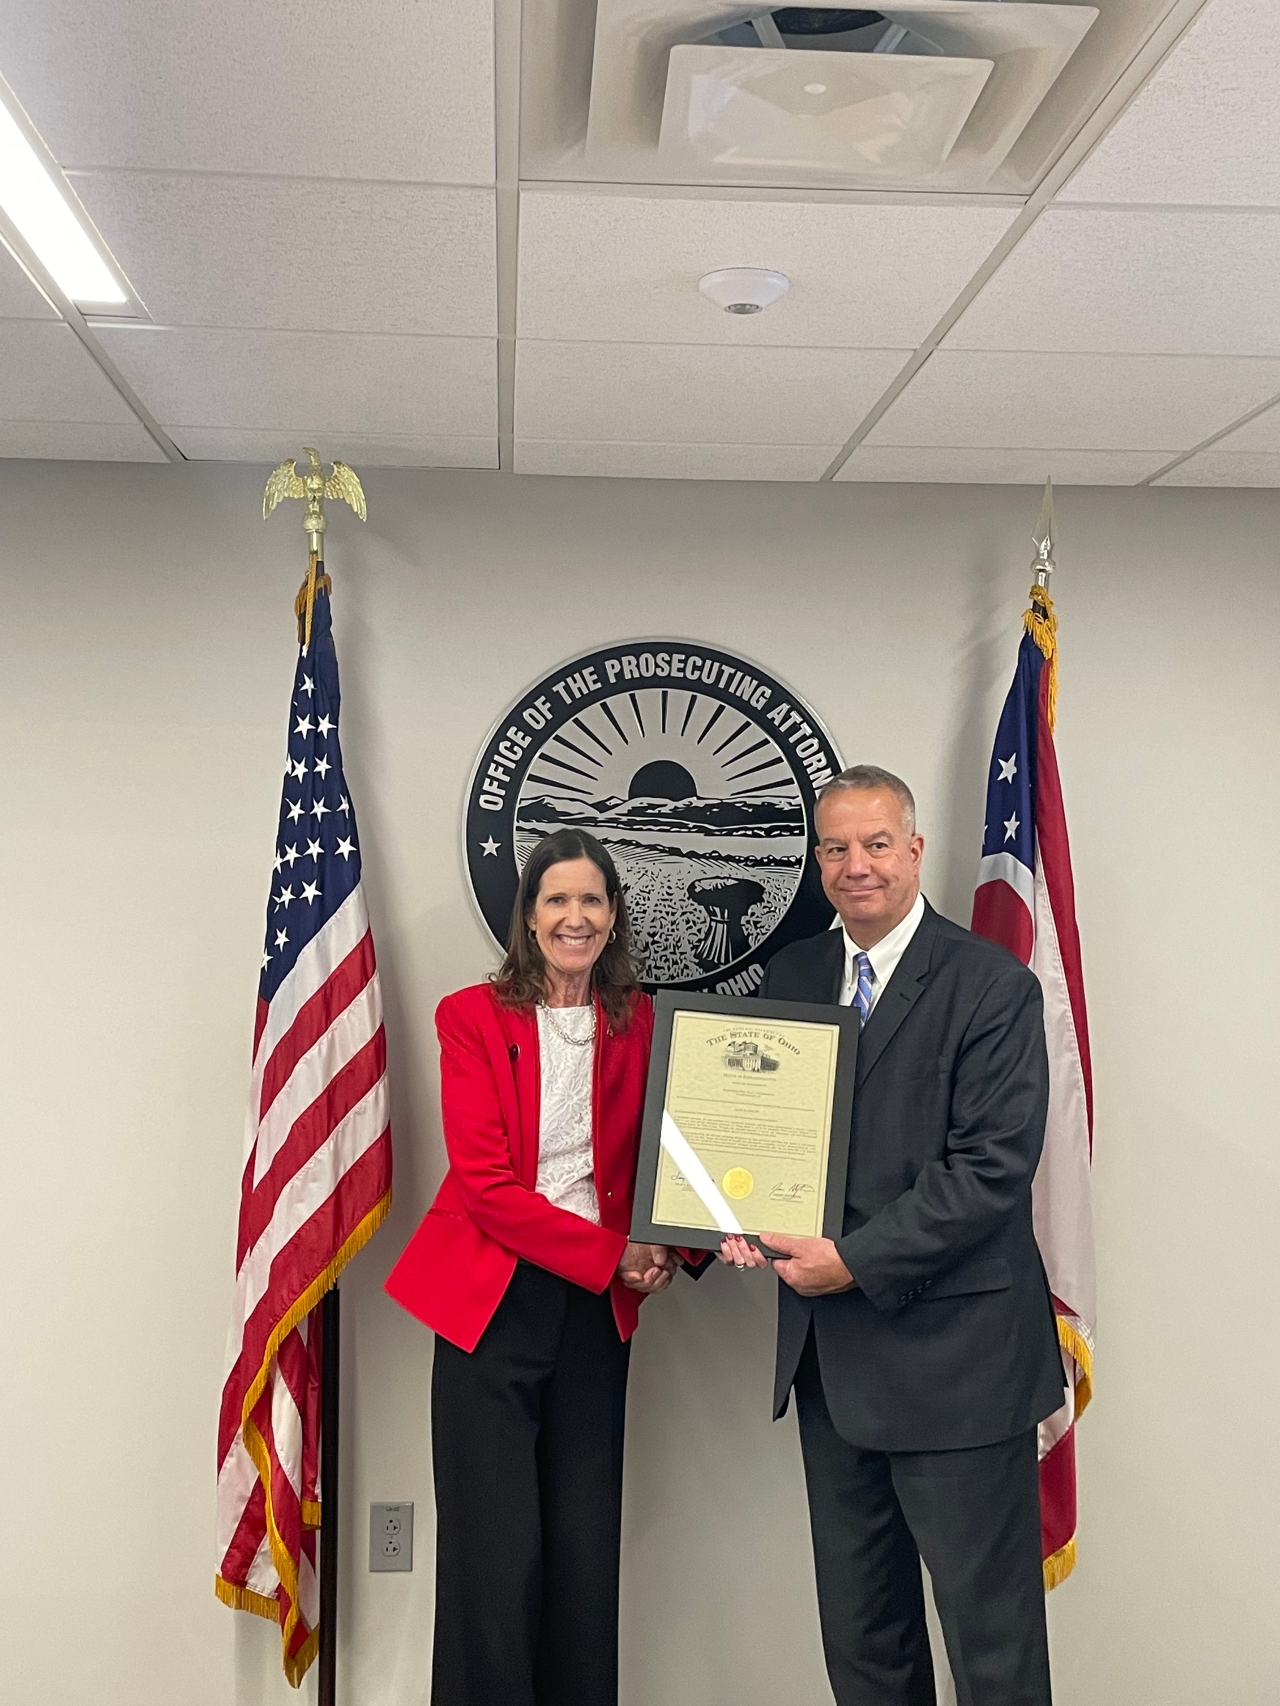 Representative Richardson presented Union County Prosecutor David Phillips with a commendation honoring his designation as the Ohio Prosecuting Attorneys Association 2023 Prosecutor of the Year.